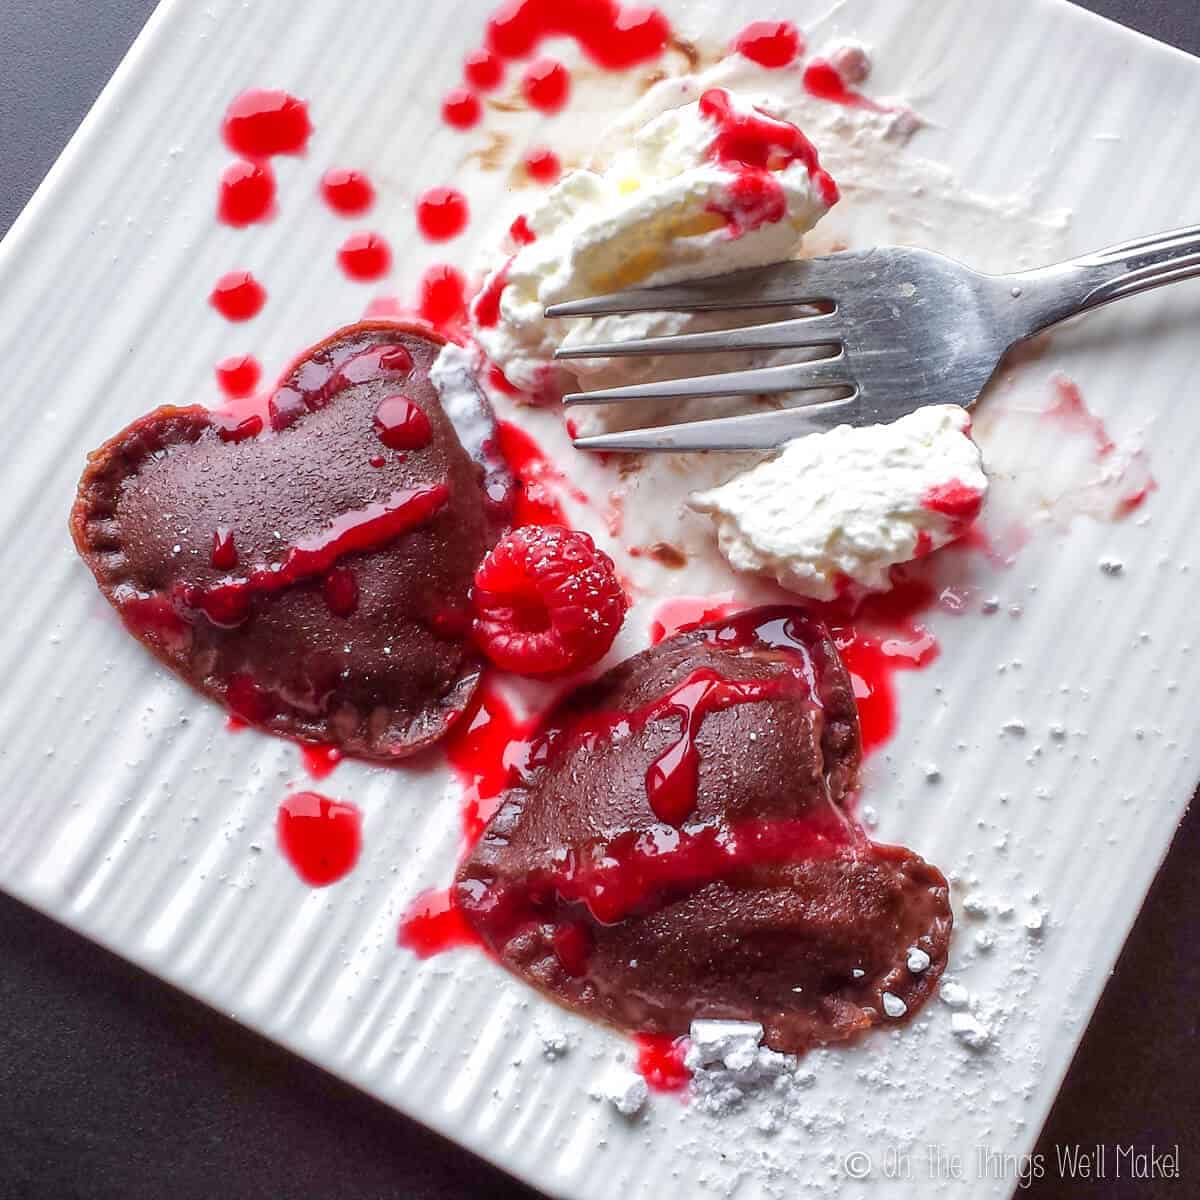 Top view of partly eaten plate of heart shaped chocolate ravioli served with whipped cream, raspberries and raspberry sauce.